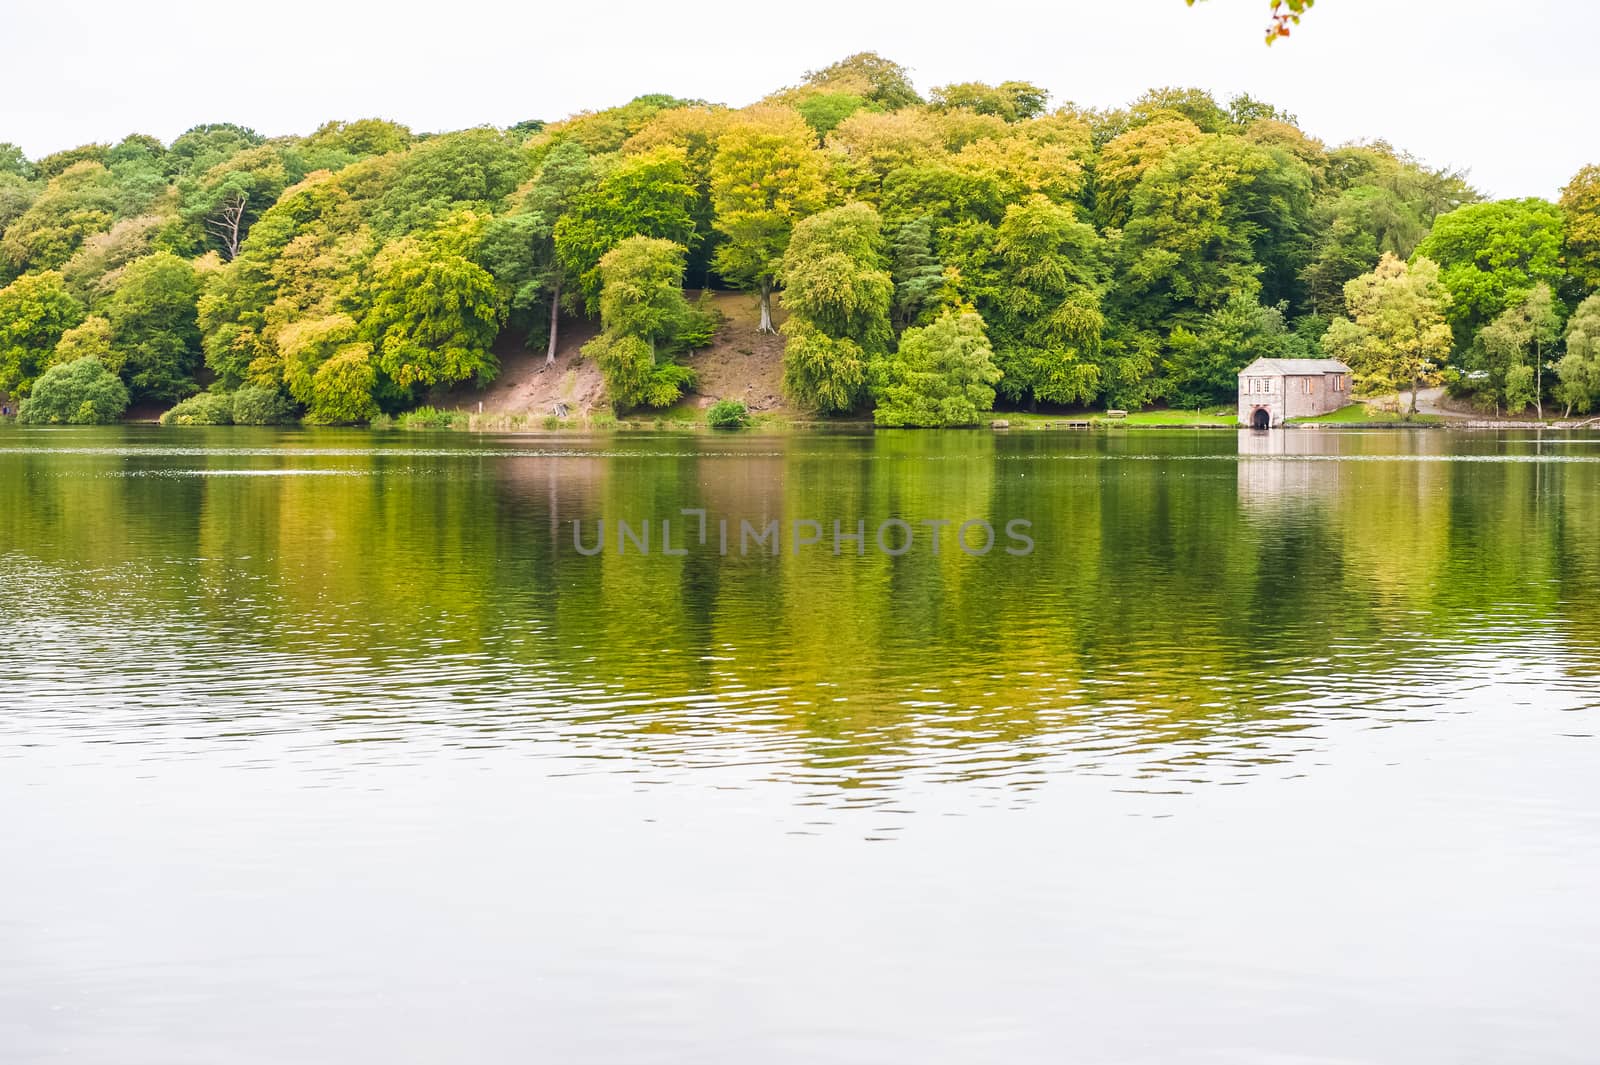 Talkin Tarn. The view across Talkin Tarn, Cumbria England. The tarn is a glacial lake and country park close to the town of Brampton.